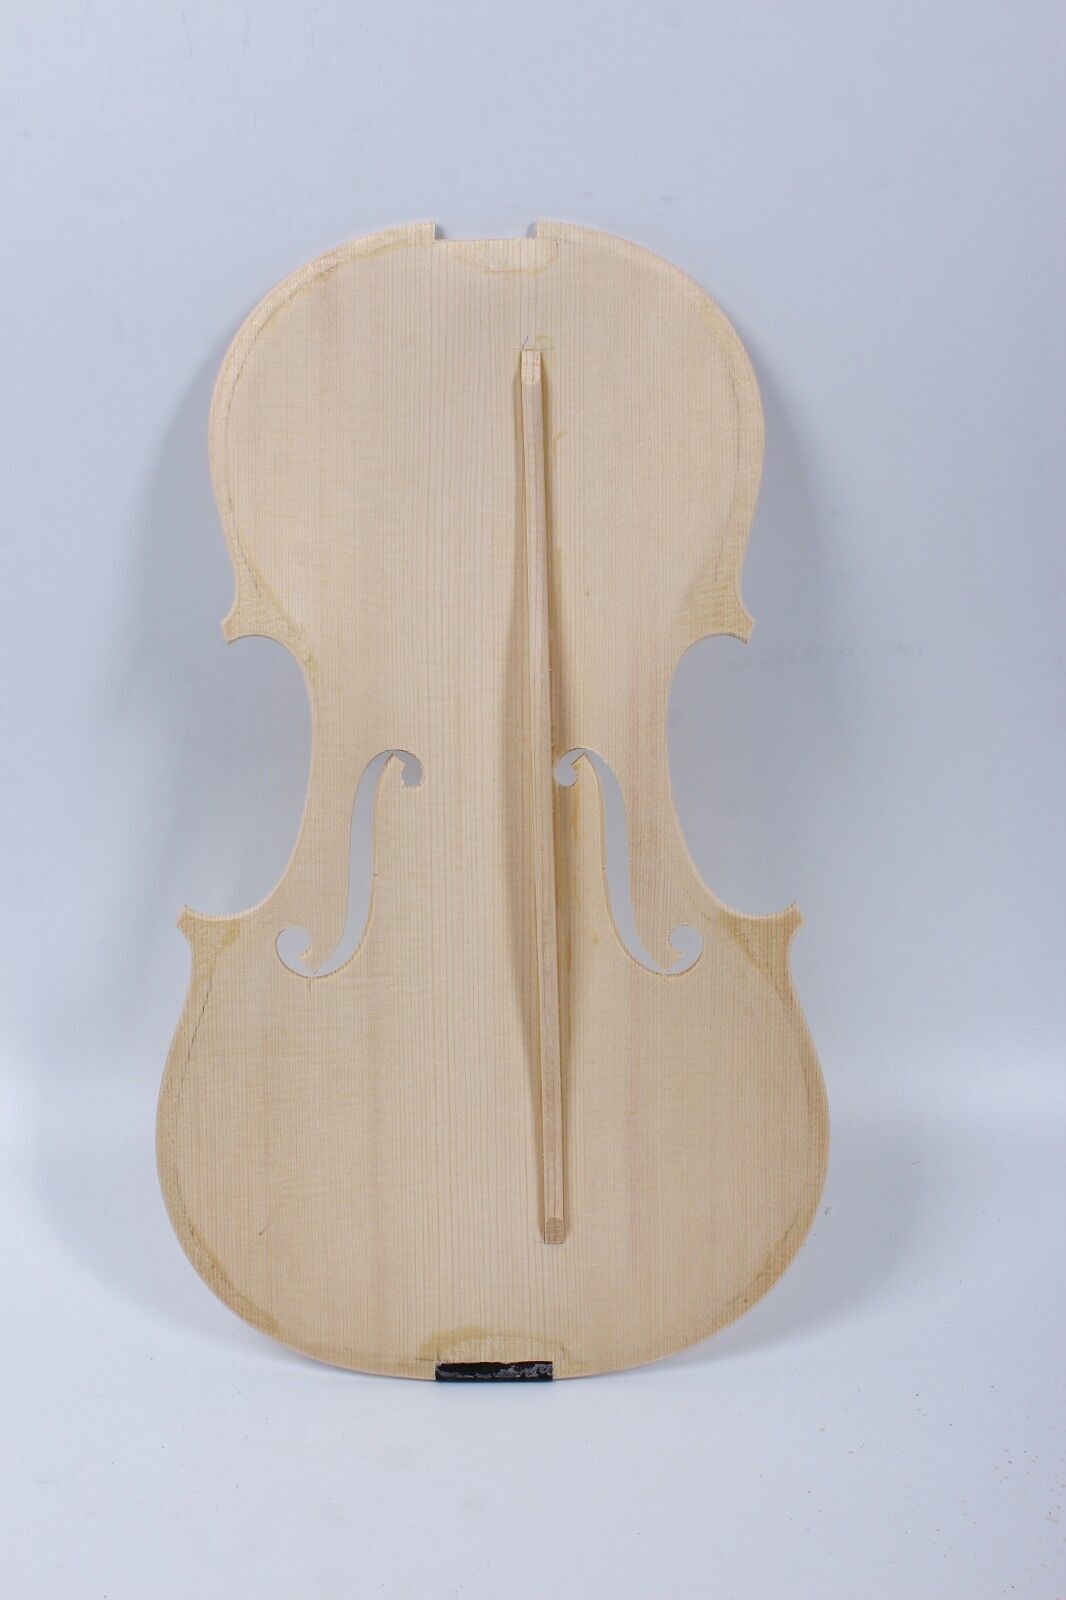  1pcs Unfinished Violin Top 4/4 Russian Spruce Hand made Violin Accessories